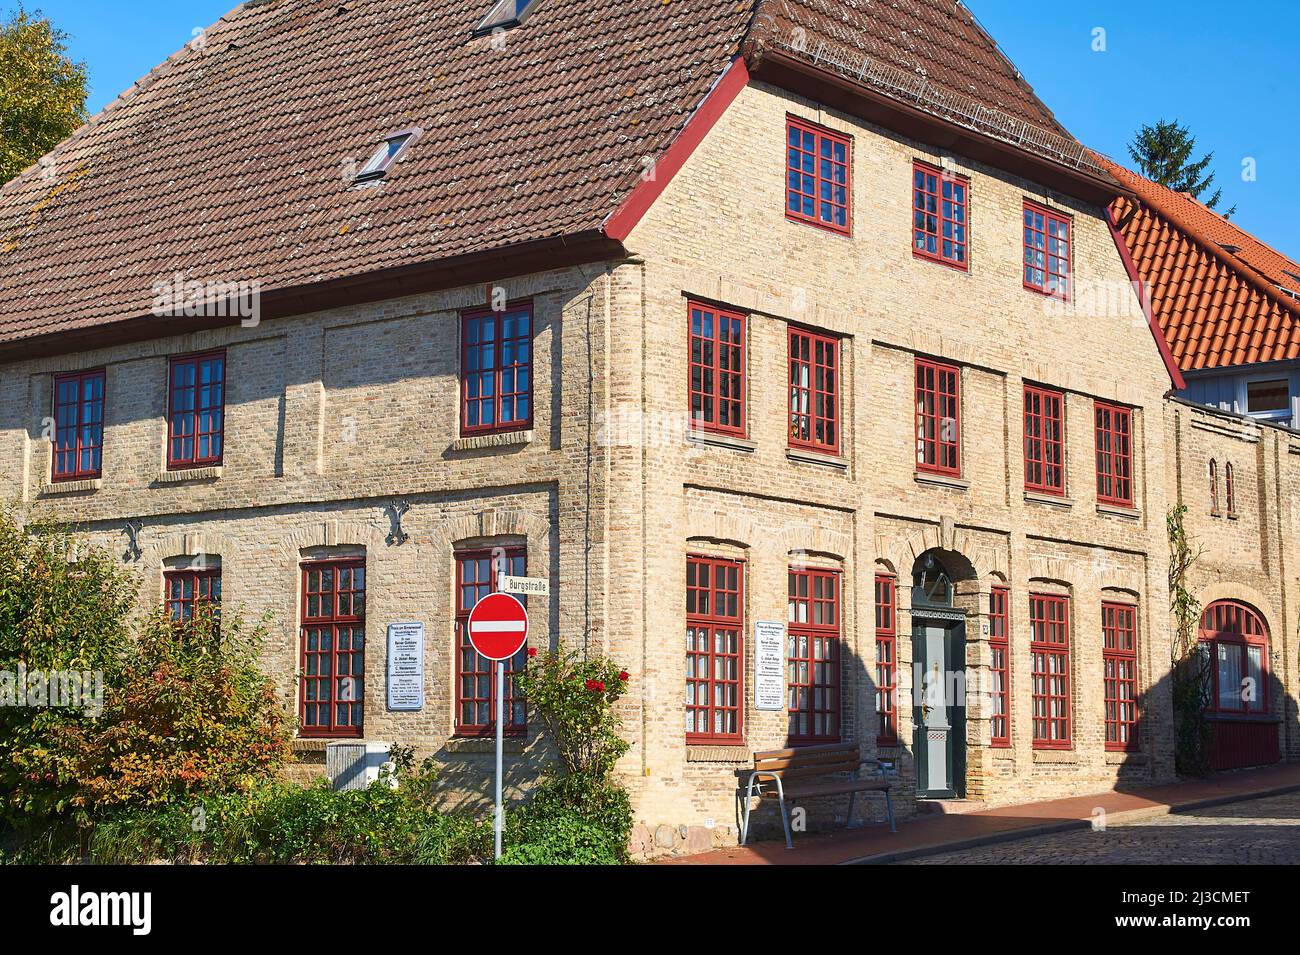 An old historical house in Neustadt, Northern Germany Stock Photo